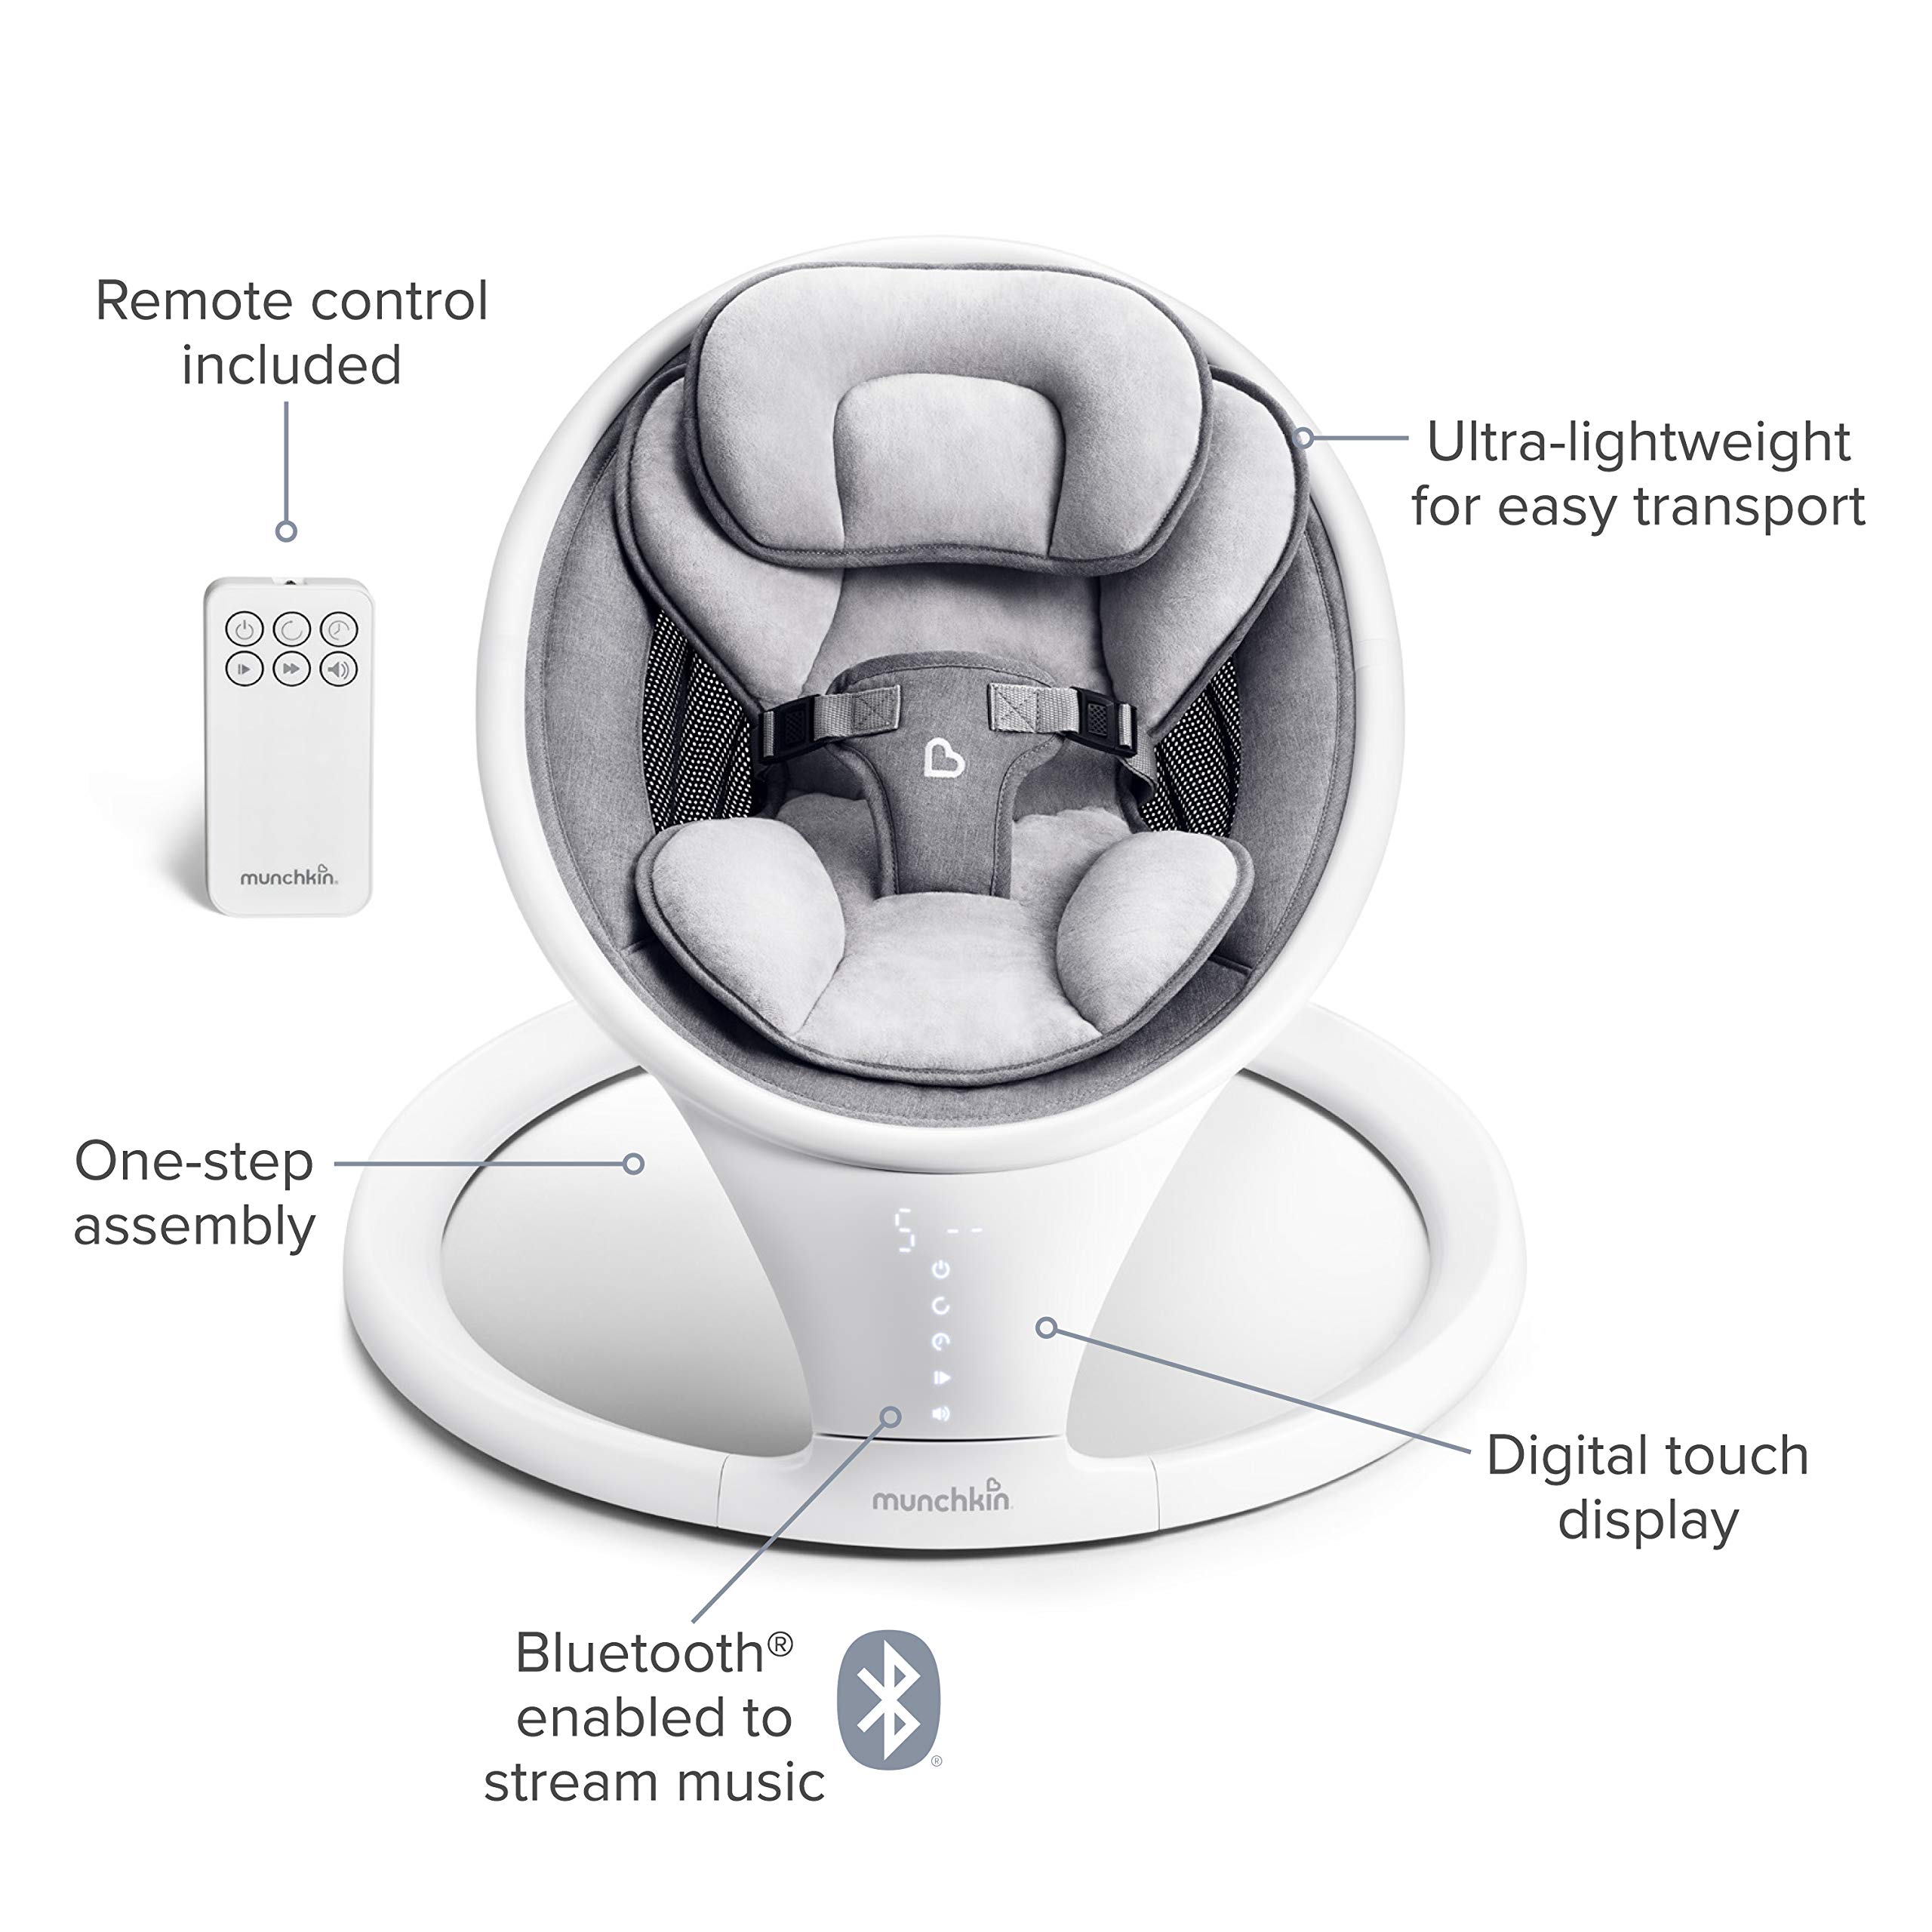 Munchkin® Bluetooth Enabled Lightweight Baby Swing with Natural Sway in 5 Ranges of Motion, Includes Remote Control